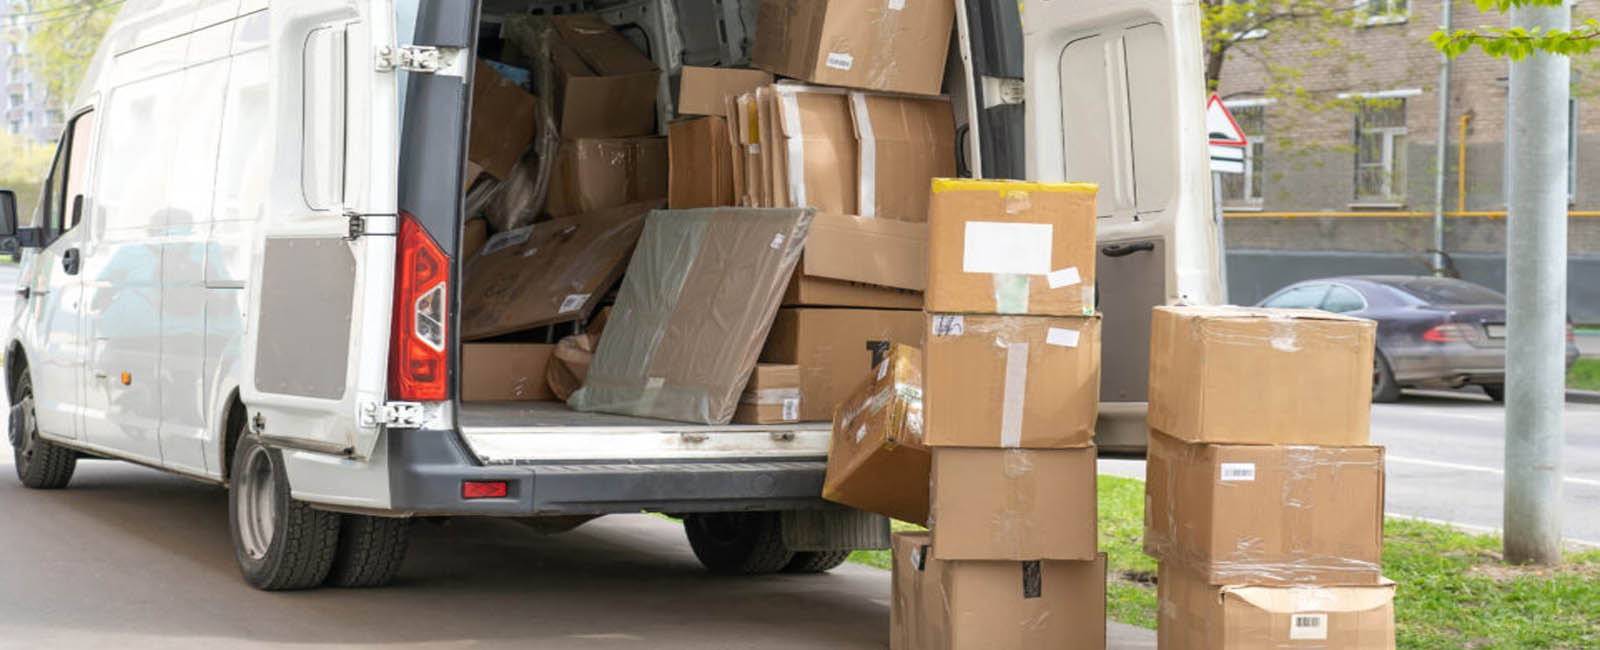 Packers and Movers Goa